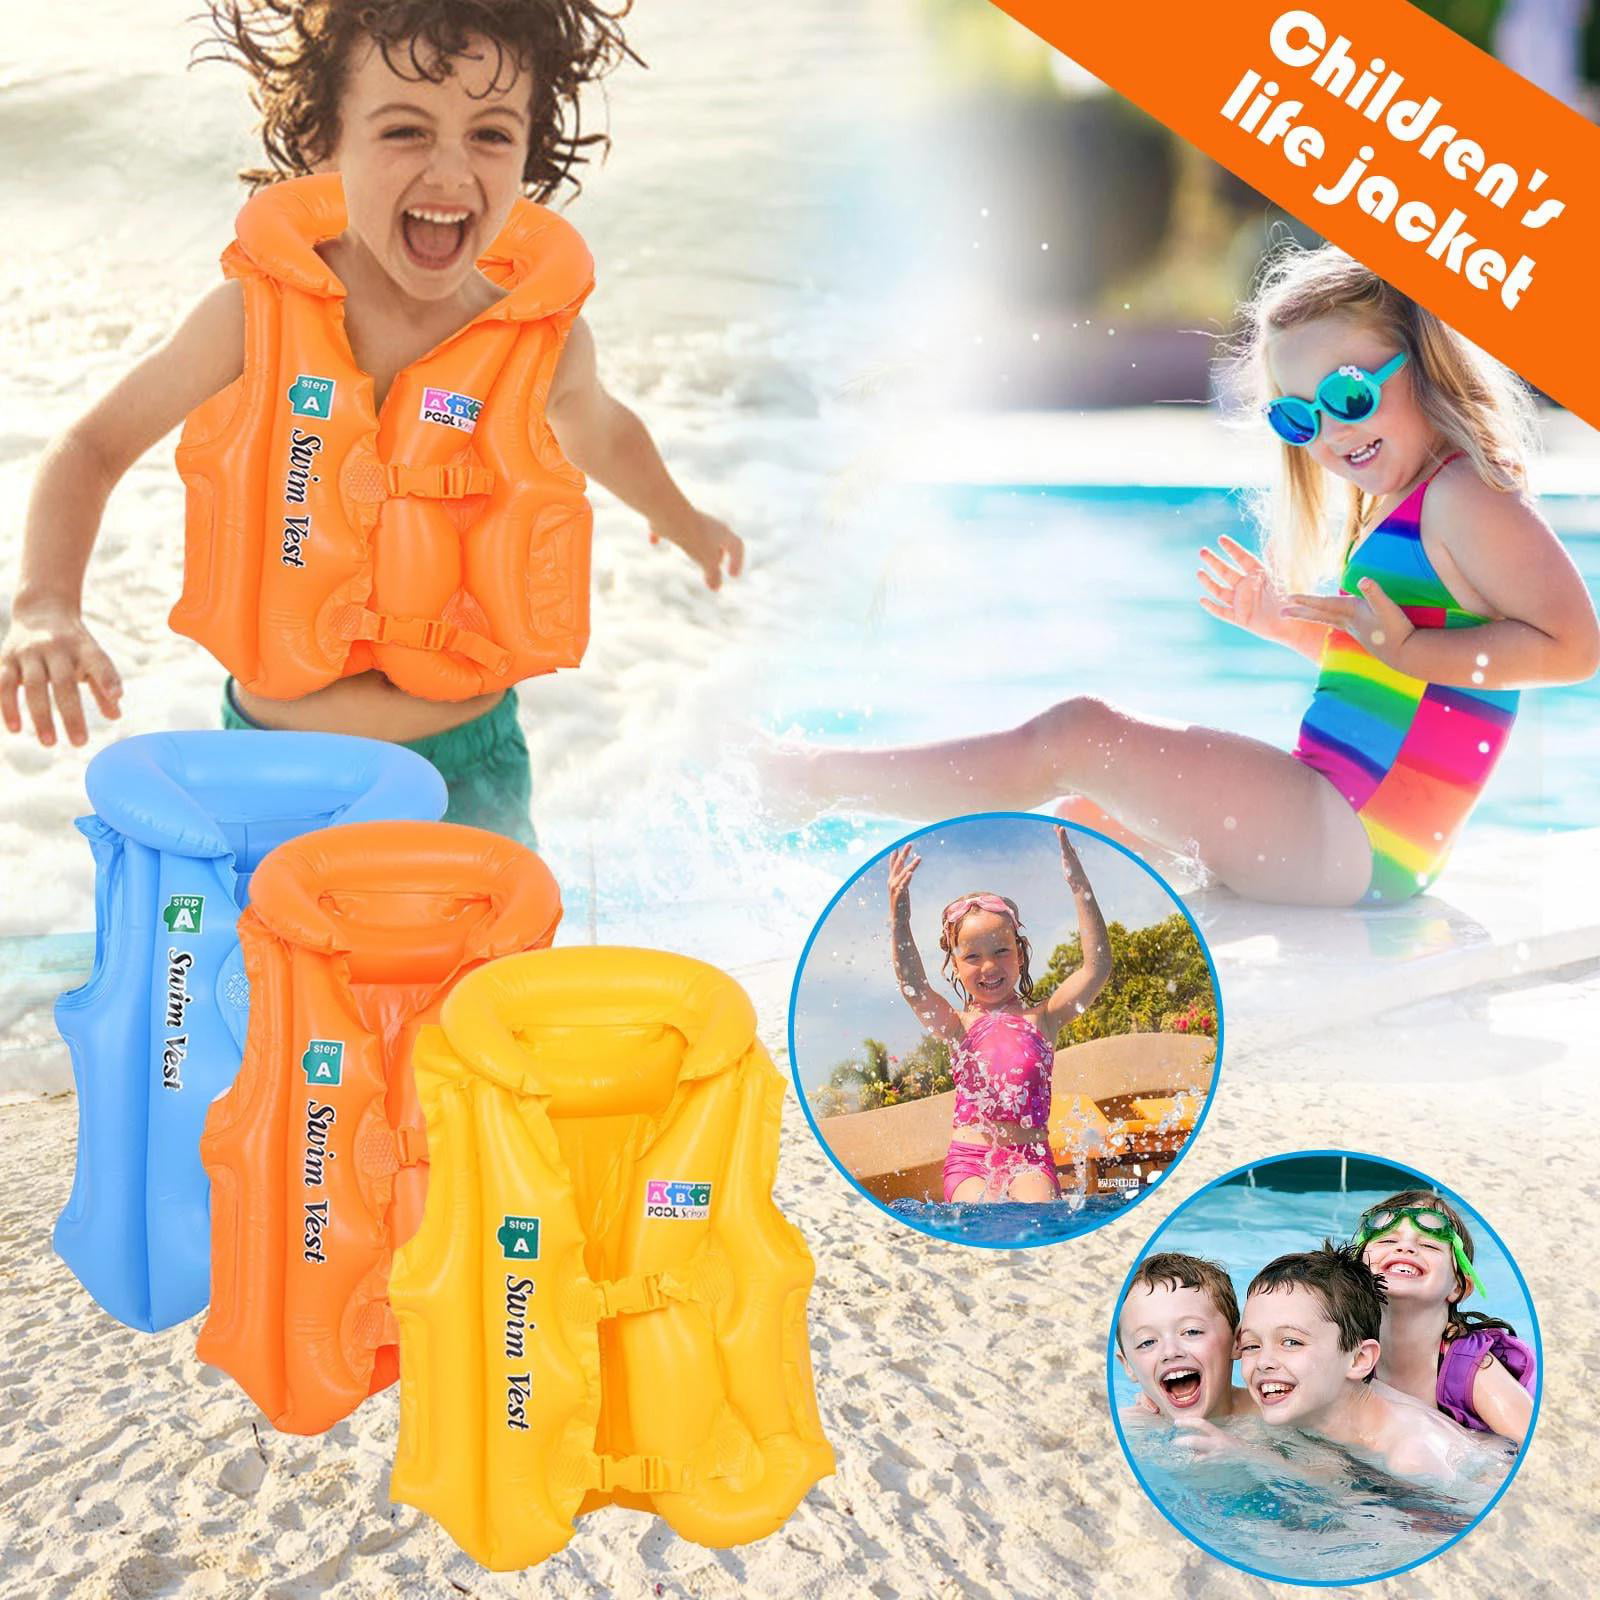 4 Kids Pool Floats and 7 to Learn to Swim and Train 5 Suitable for Children Aged 2 3 Swim Vest 6 Foldable Swim Vest Jacket with Storage Bag 